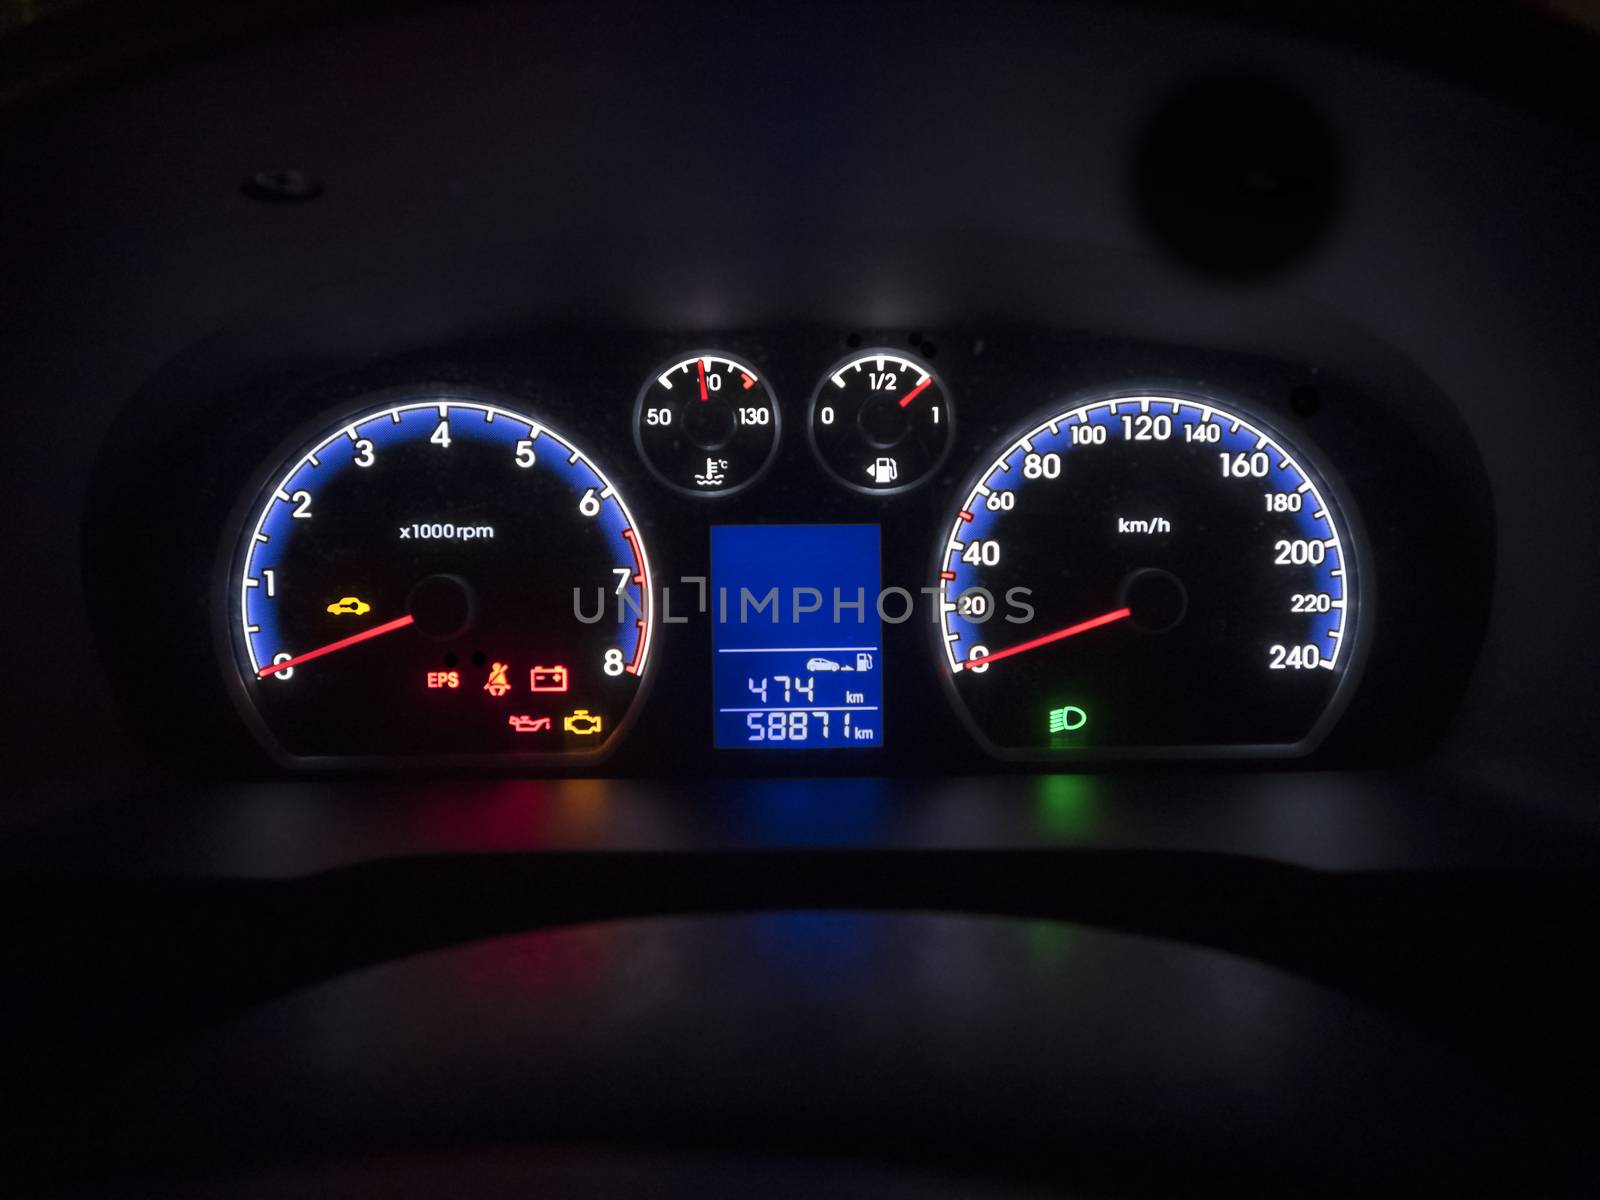 Car dashboard instrument panel with dials and guages all lit up